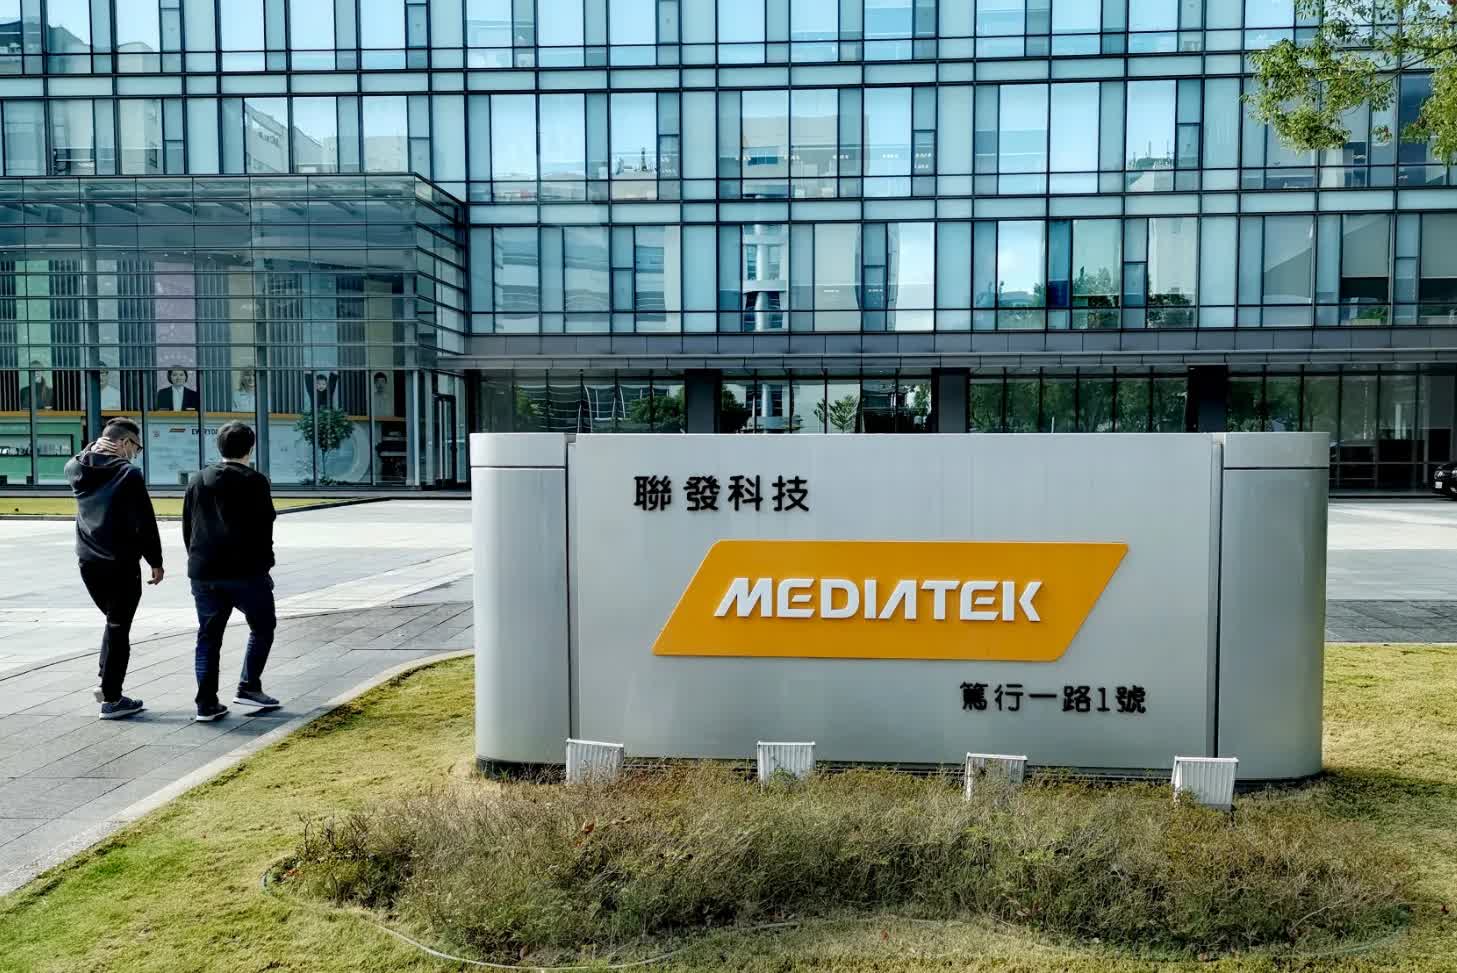 MediaTek beats Apple in announcing 3nm chip, but production is a year away